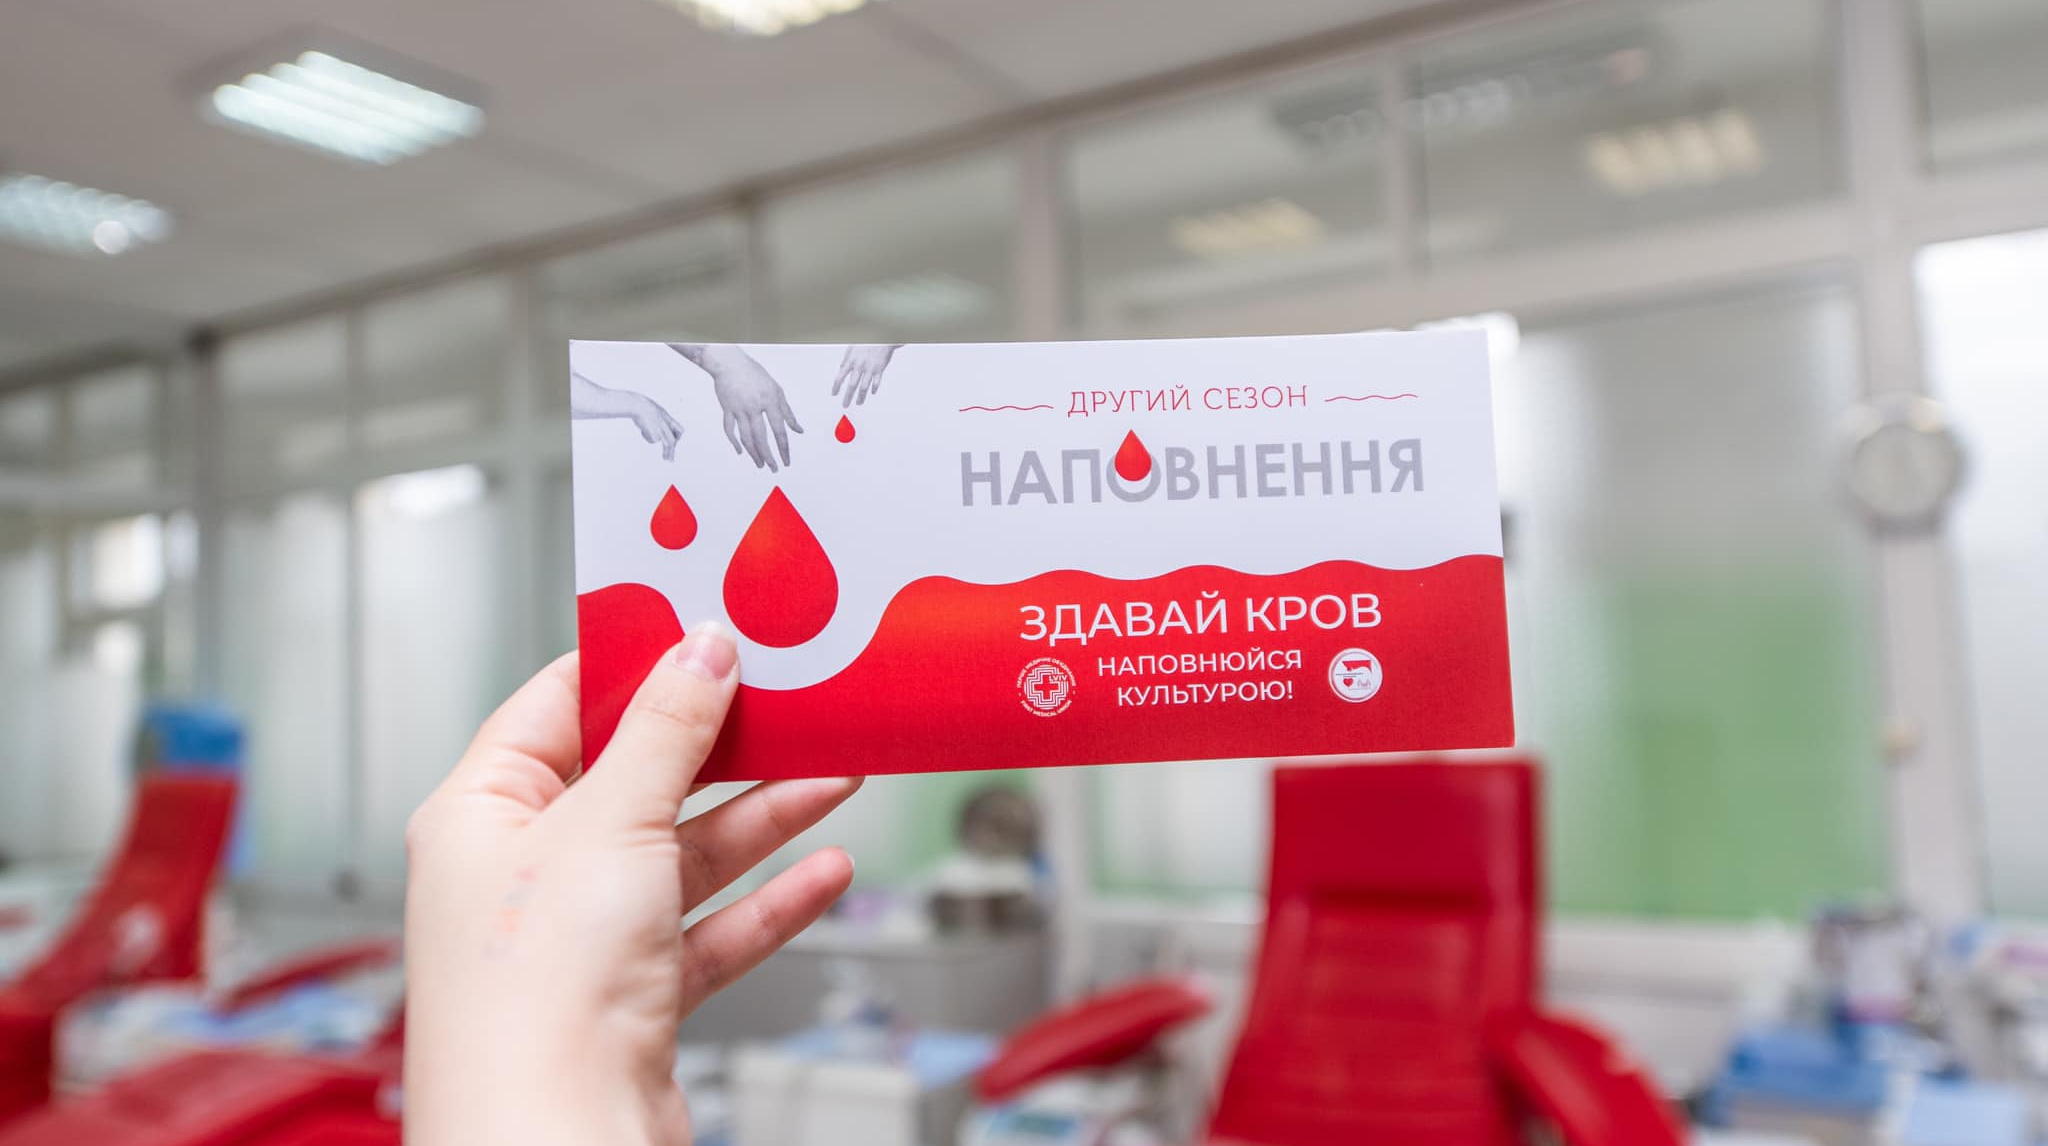 Blood donors are offered free admission to museums and theaters in Lviv